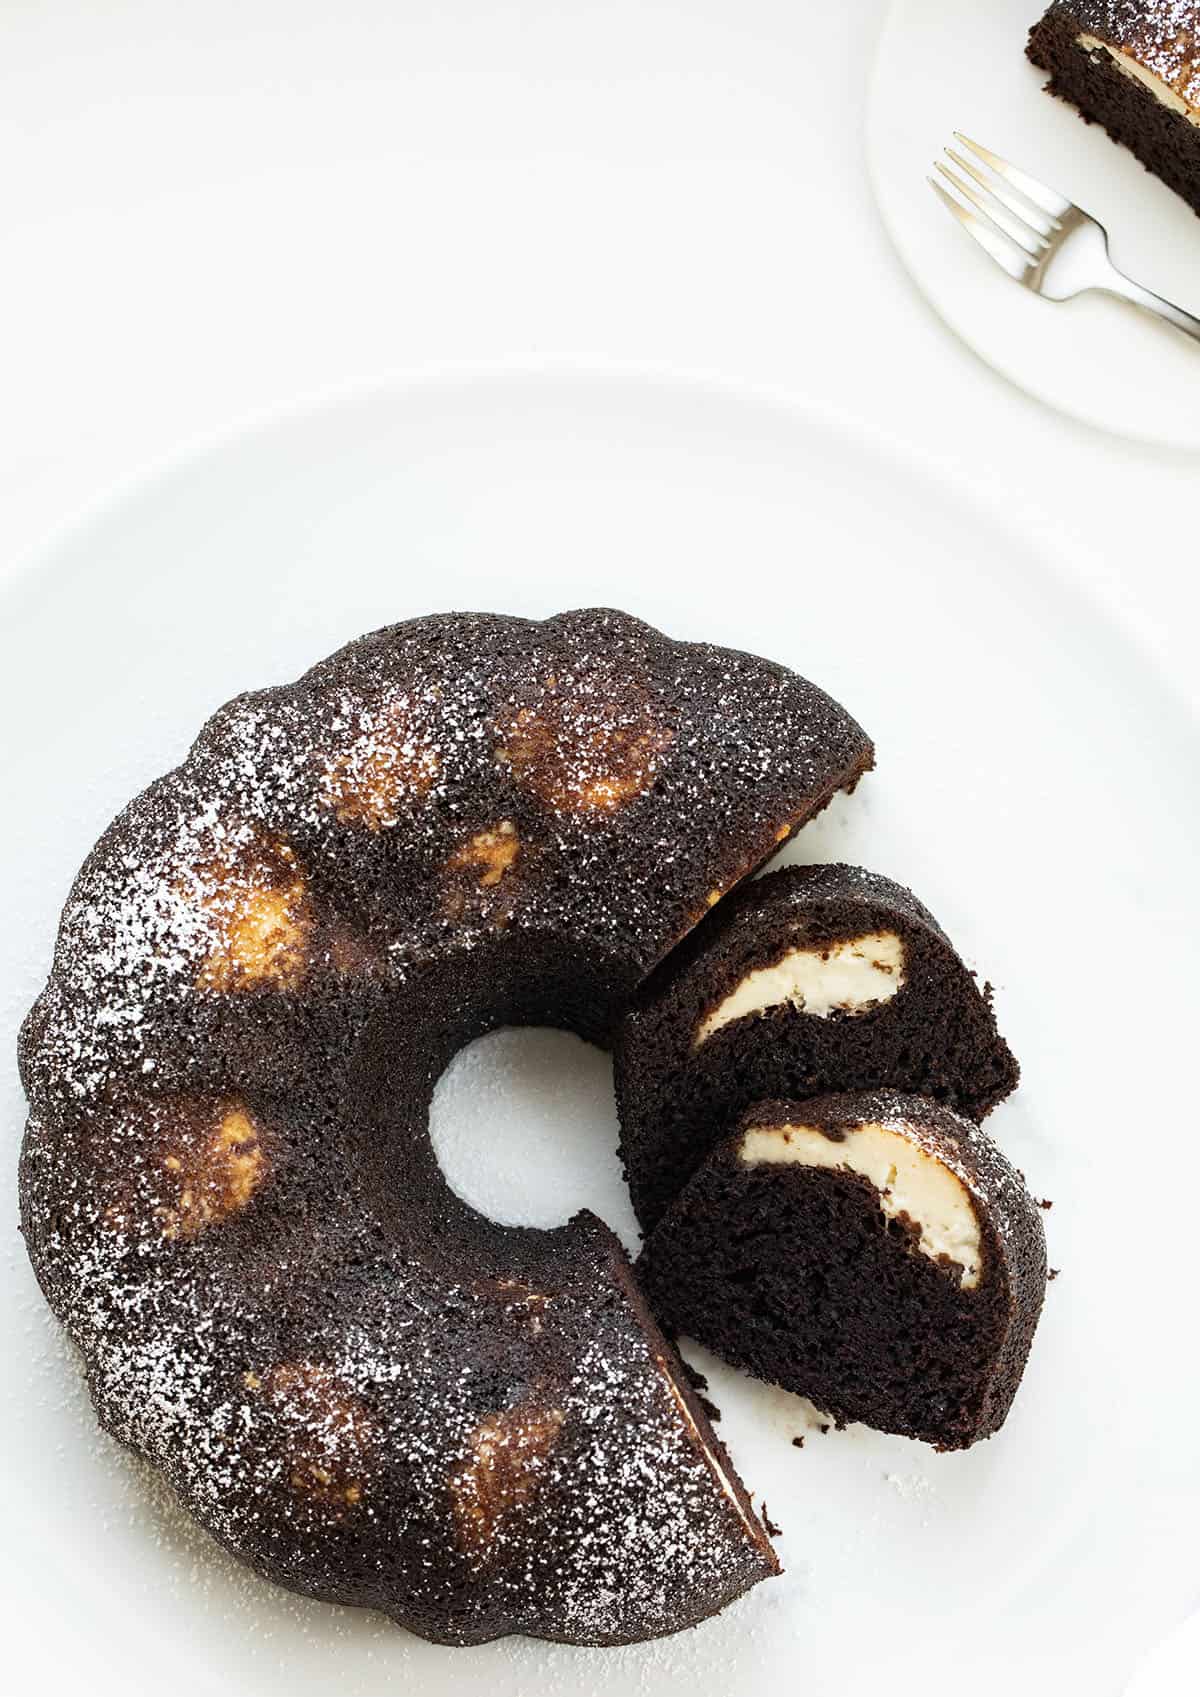 Chocolate Bundt with Cream Cheese Filling From Overhead with Cut Pieces Showing Inside. Dessert, Baking, Chocolate, Chocolate Dessert, Bundt Cake, Cake, Cake Recipes, Filled Bundt Cake, Nothing but Bundts Cake, Baking Recipes, i am baker, iambaker